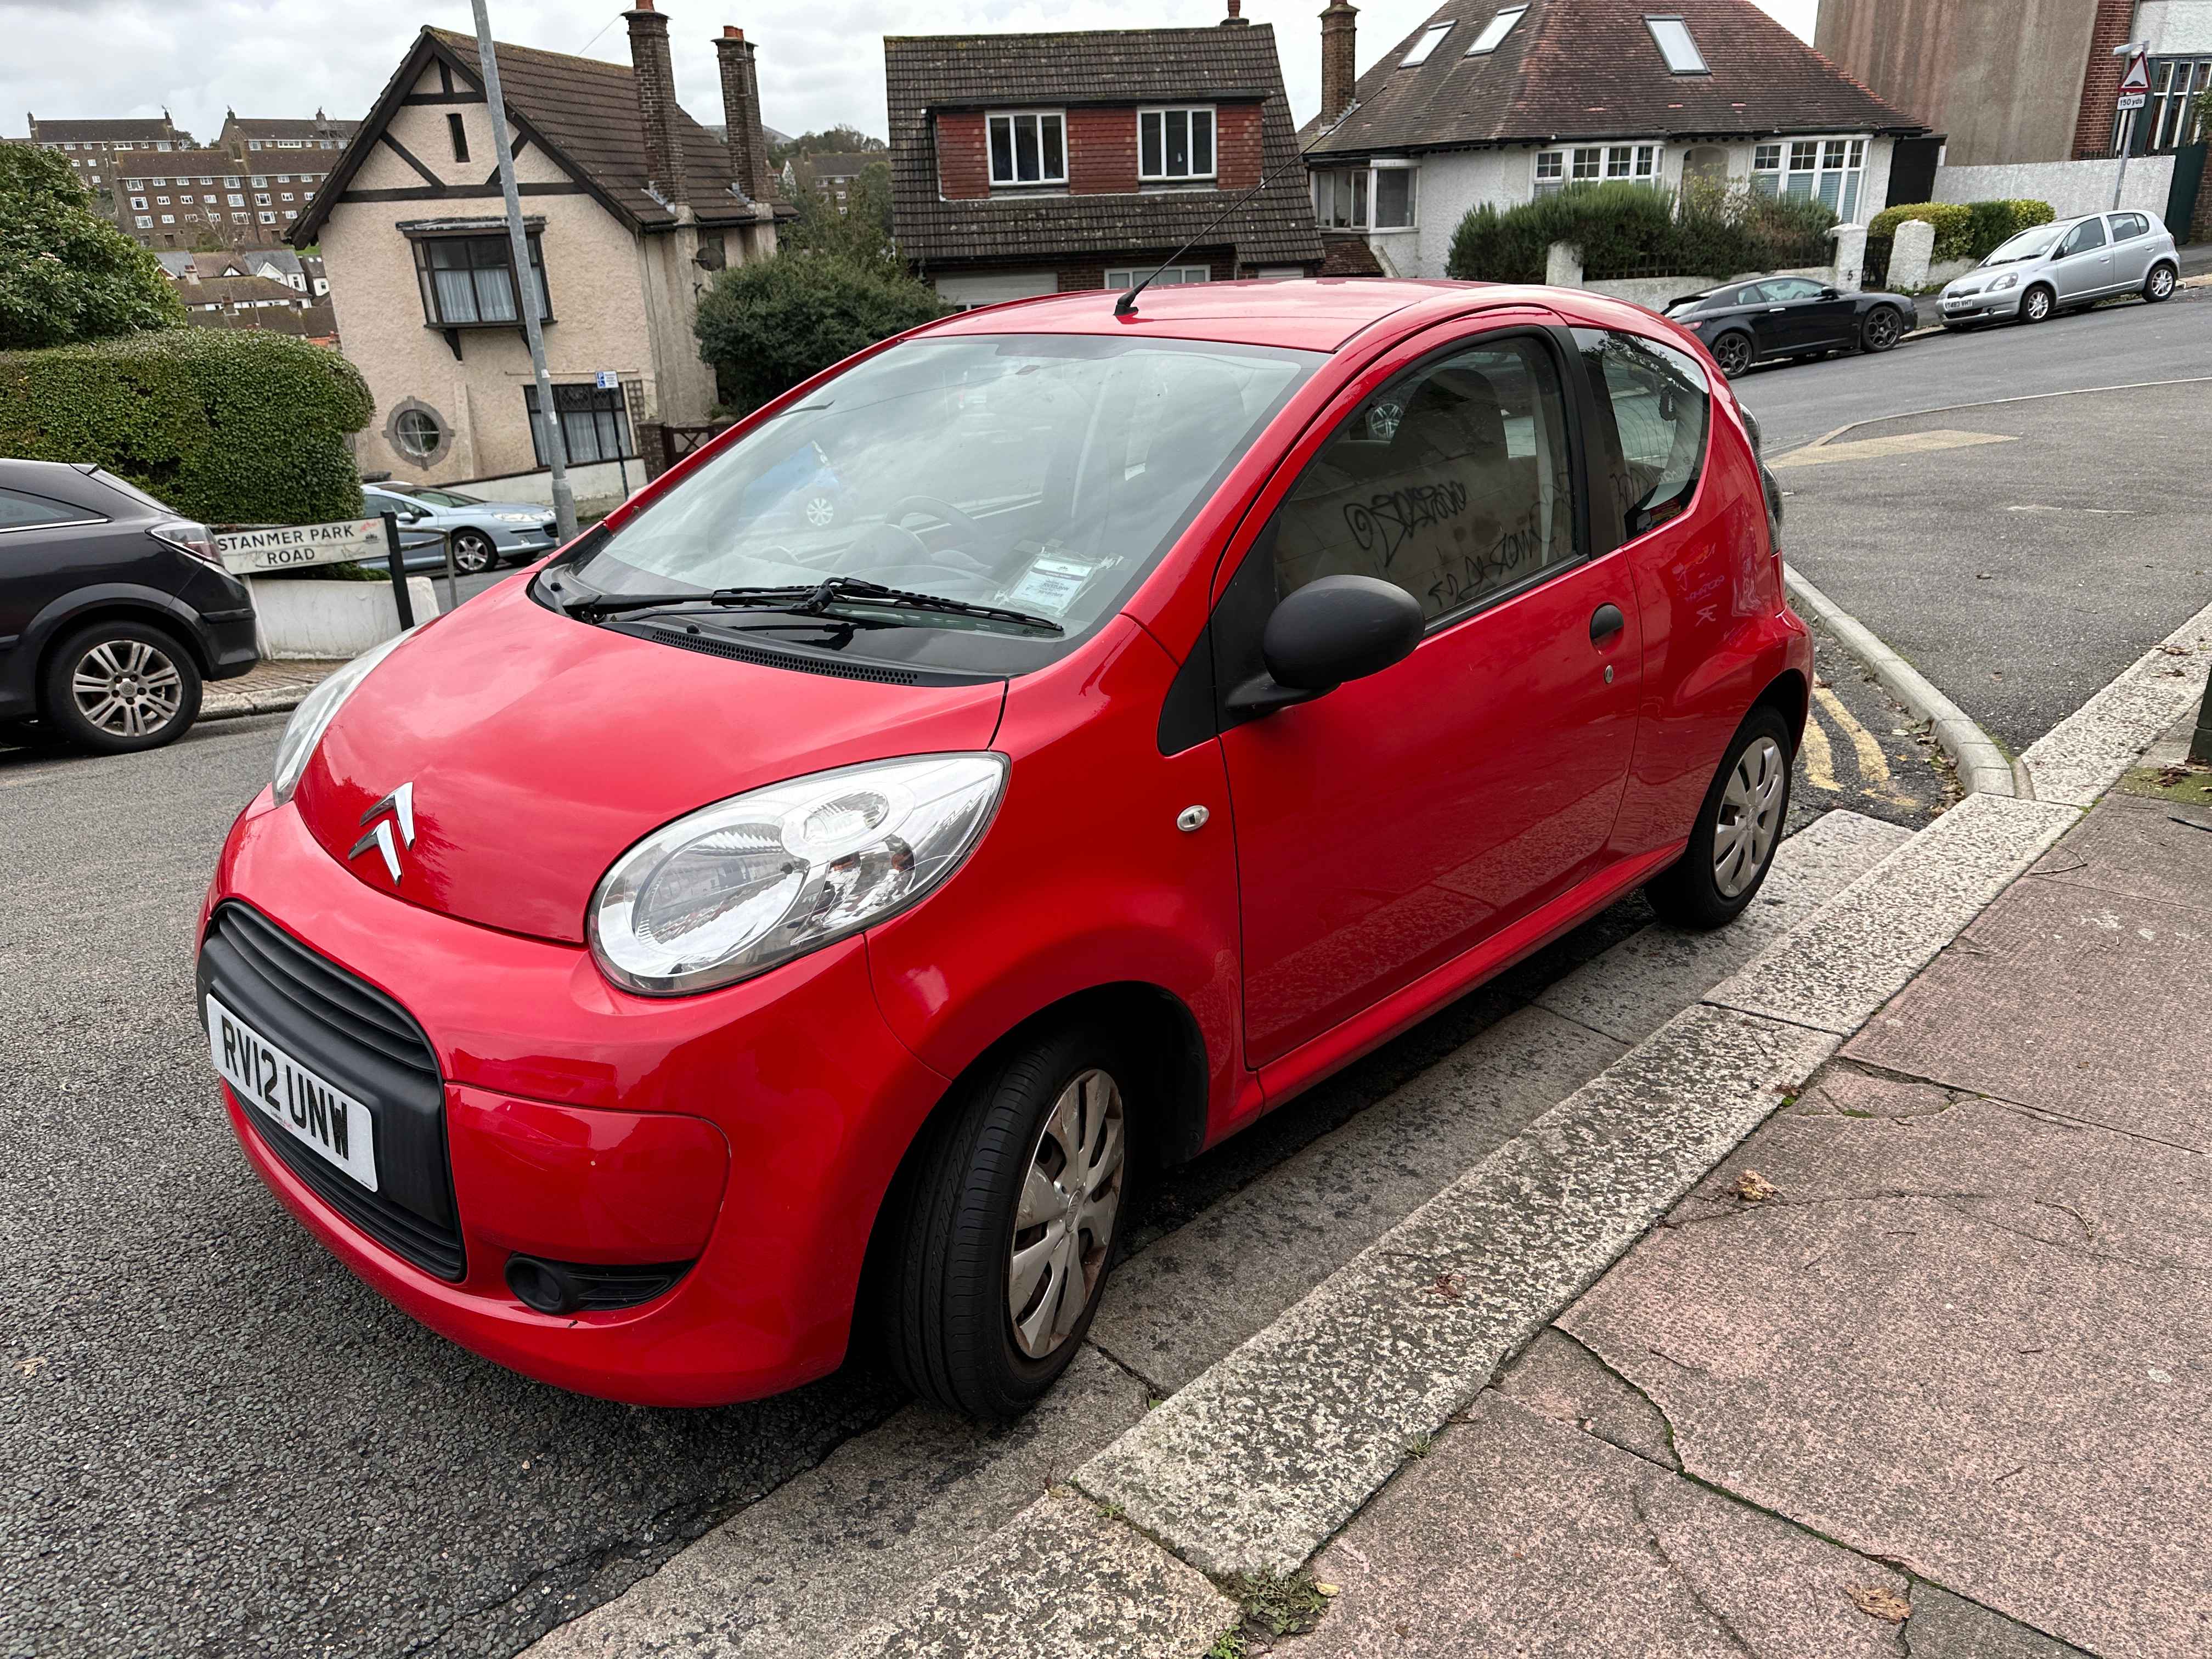 Photograph of RV12 UNW - a Red Citroen C1 parked in Hollingdean by a non-resident. The fourth of four photographs supplied by the residents of Hollingdean.